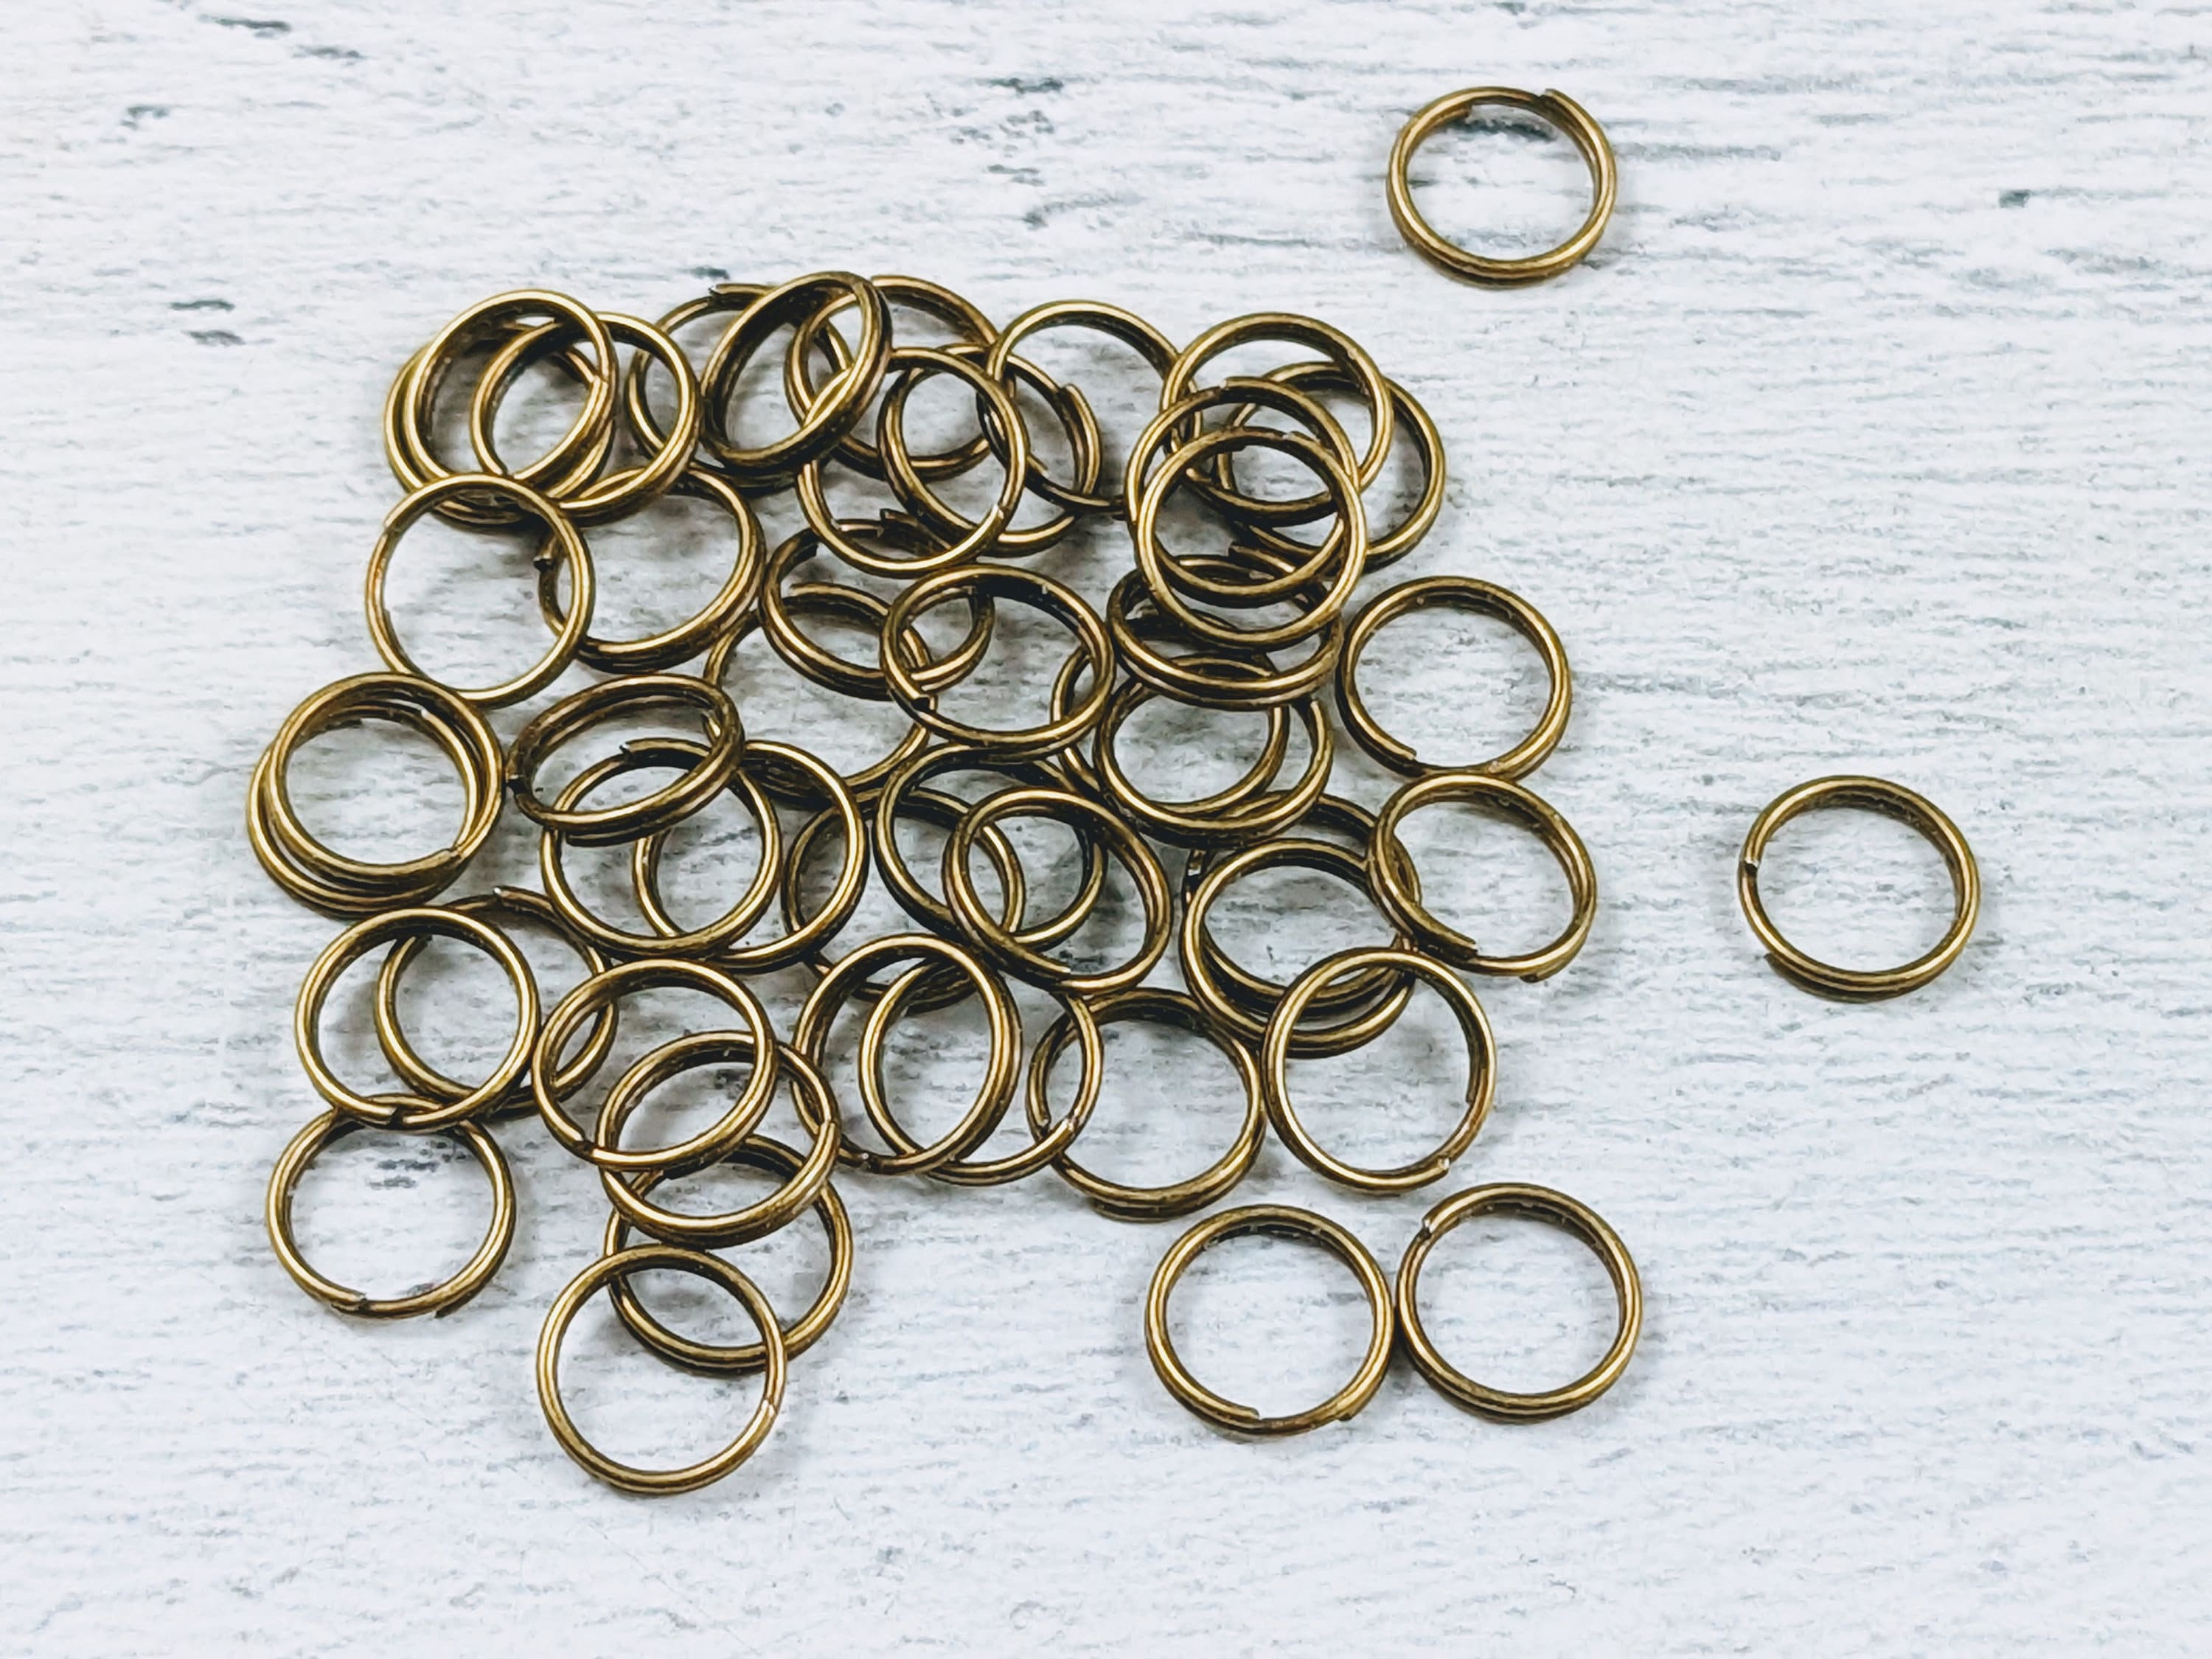 Jump Rings Burnished Silver, 4mm, 6mm, 8mm, 10mm, or 12mm, PK of 10, Brass  Jump Rings, OPEN Ring, Heavy 15 GA (1.8mm) Jump Rings, Fast Ship